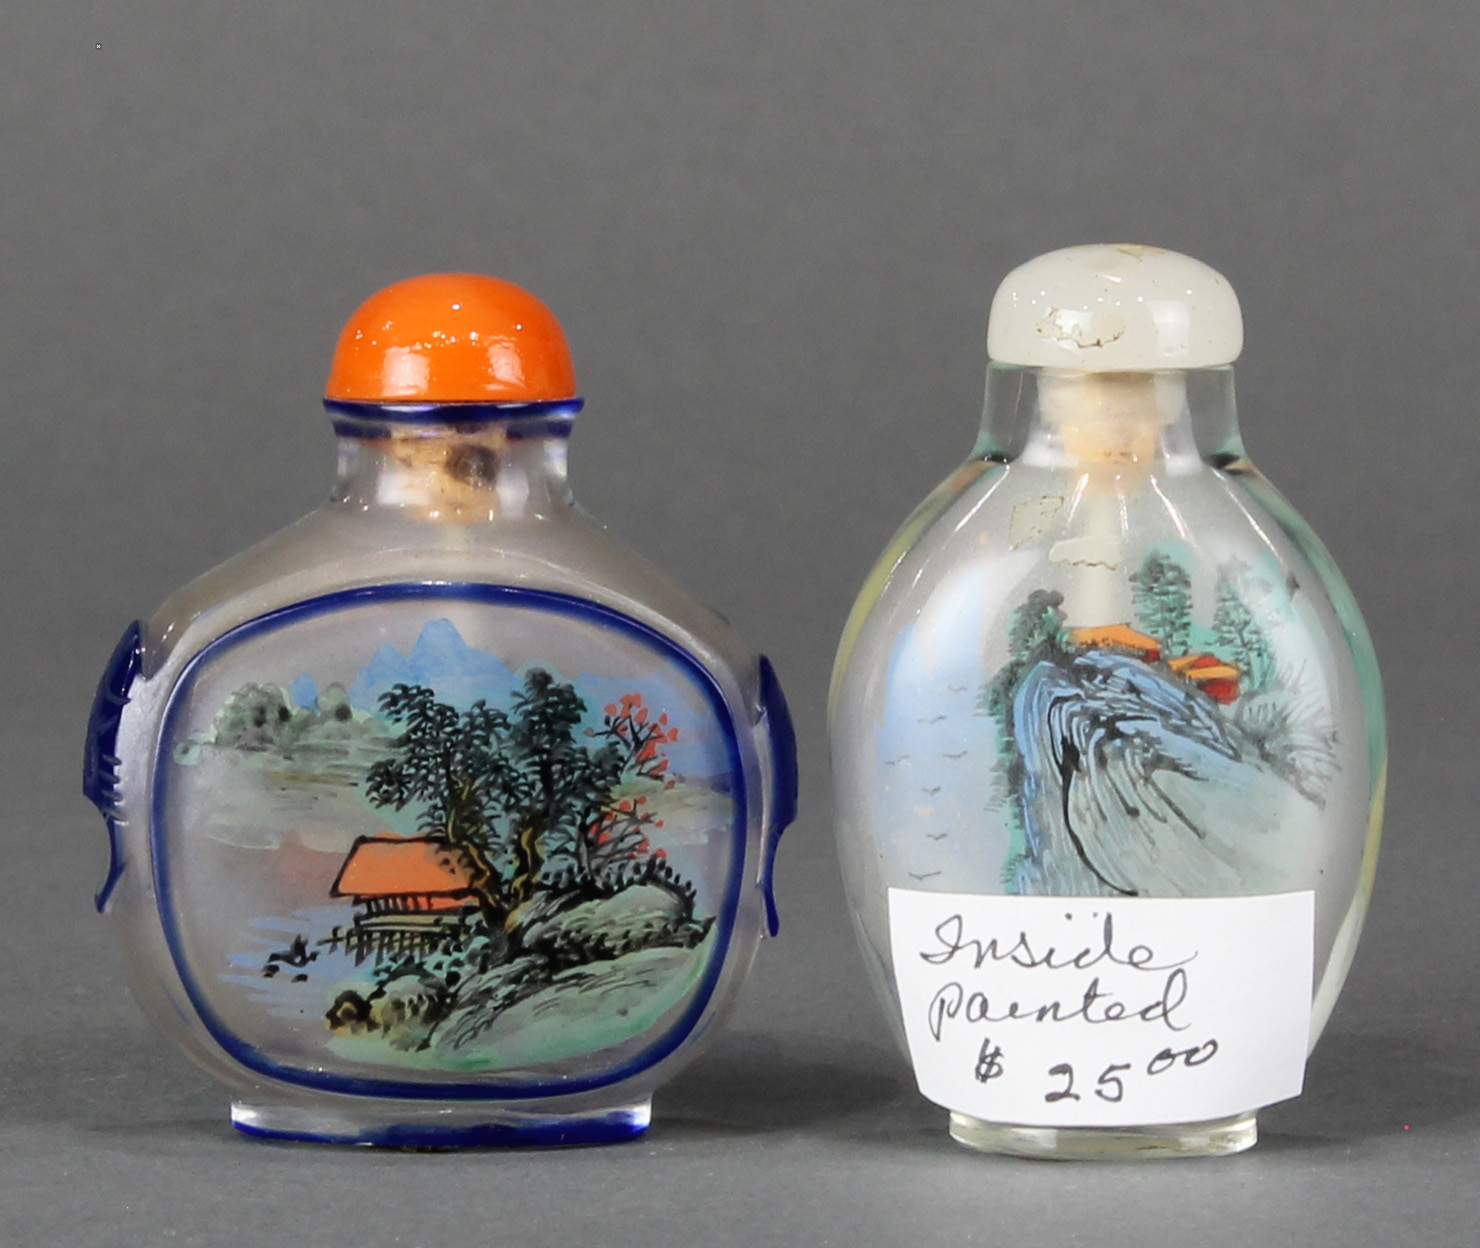 (Lot of 2) Inside Painted Snuff Bottles - Image 3 of 6